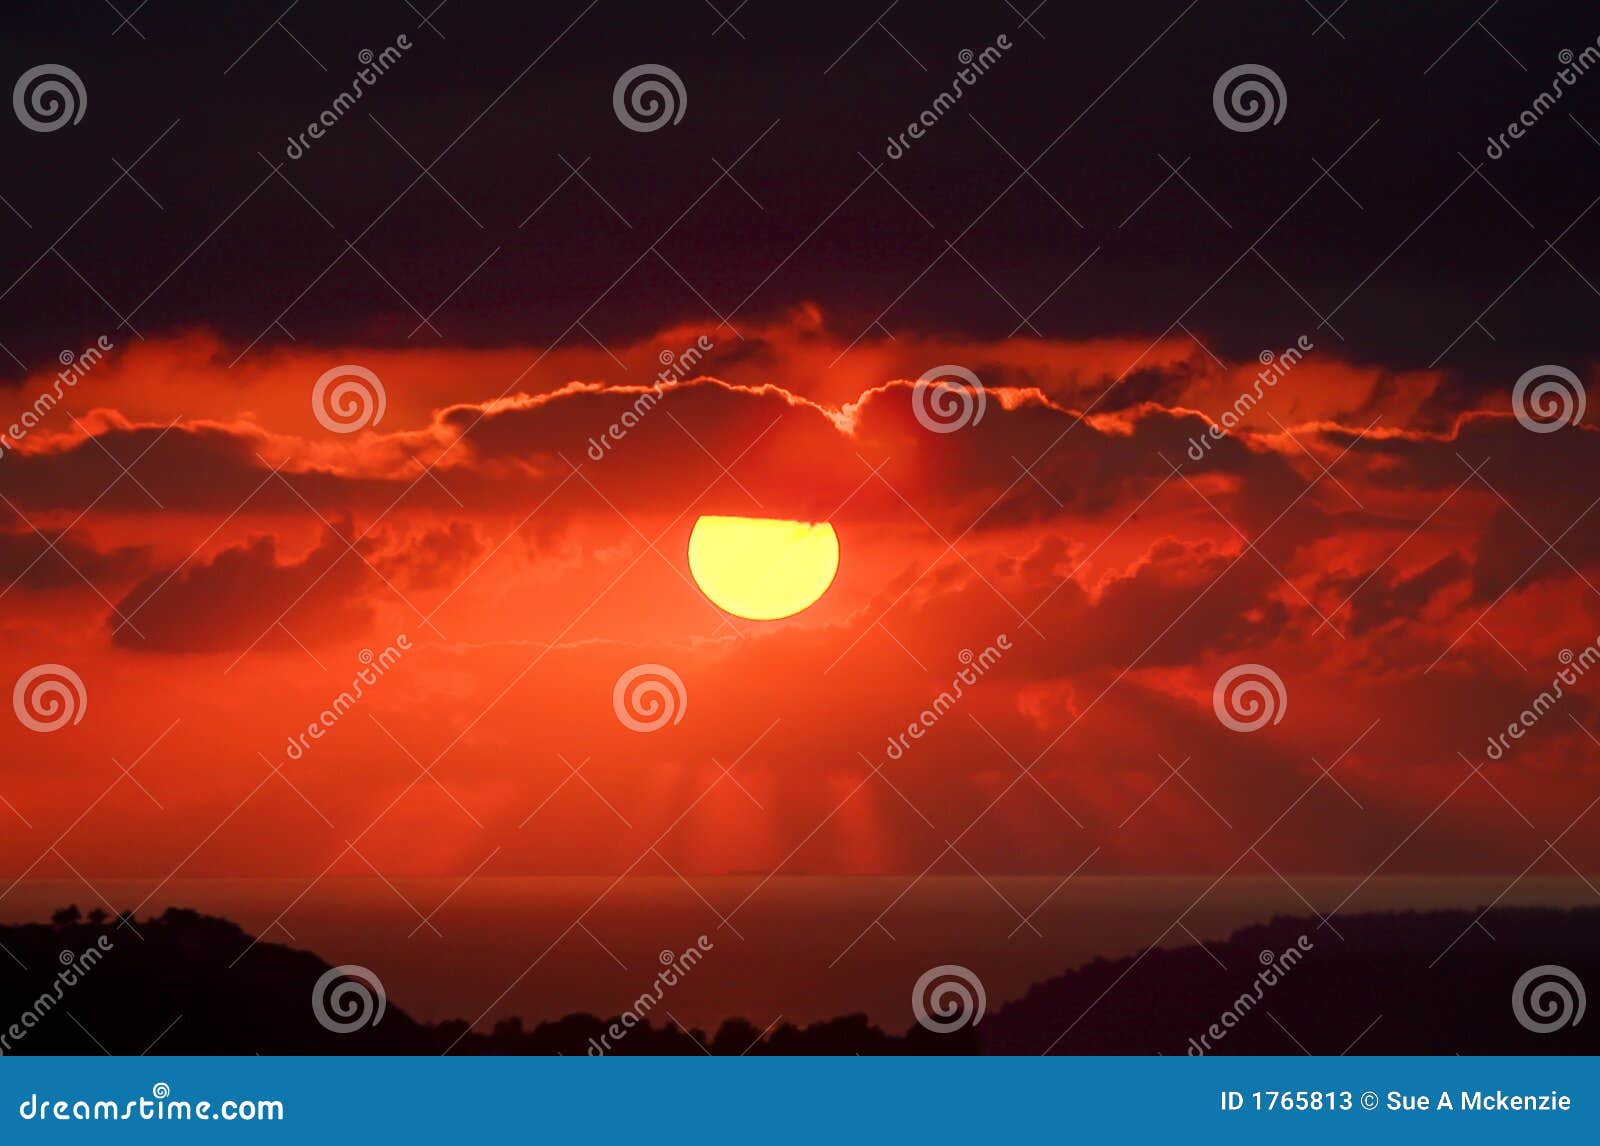 Ruby Sunset Over Ocean Sun Beams Stock Image - Image of coas